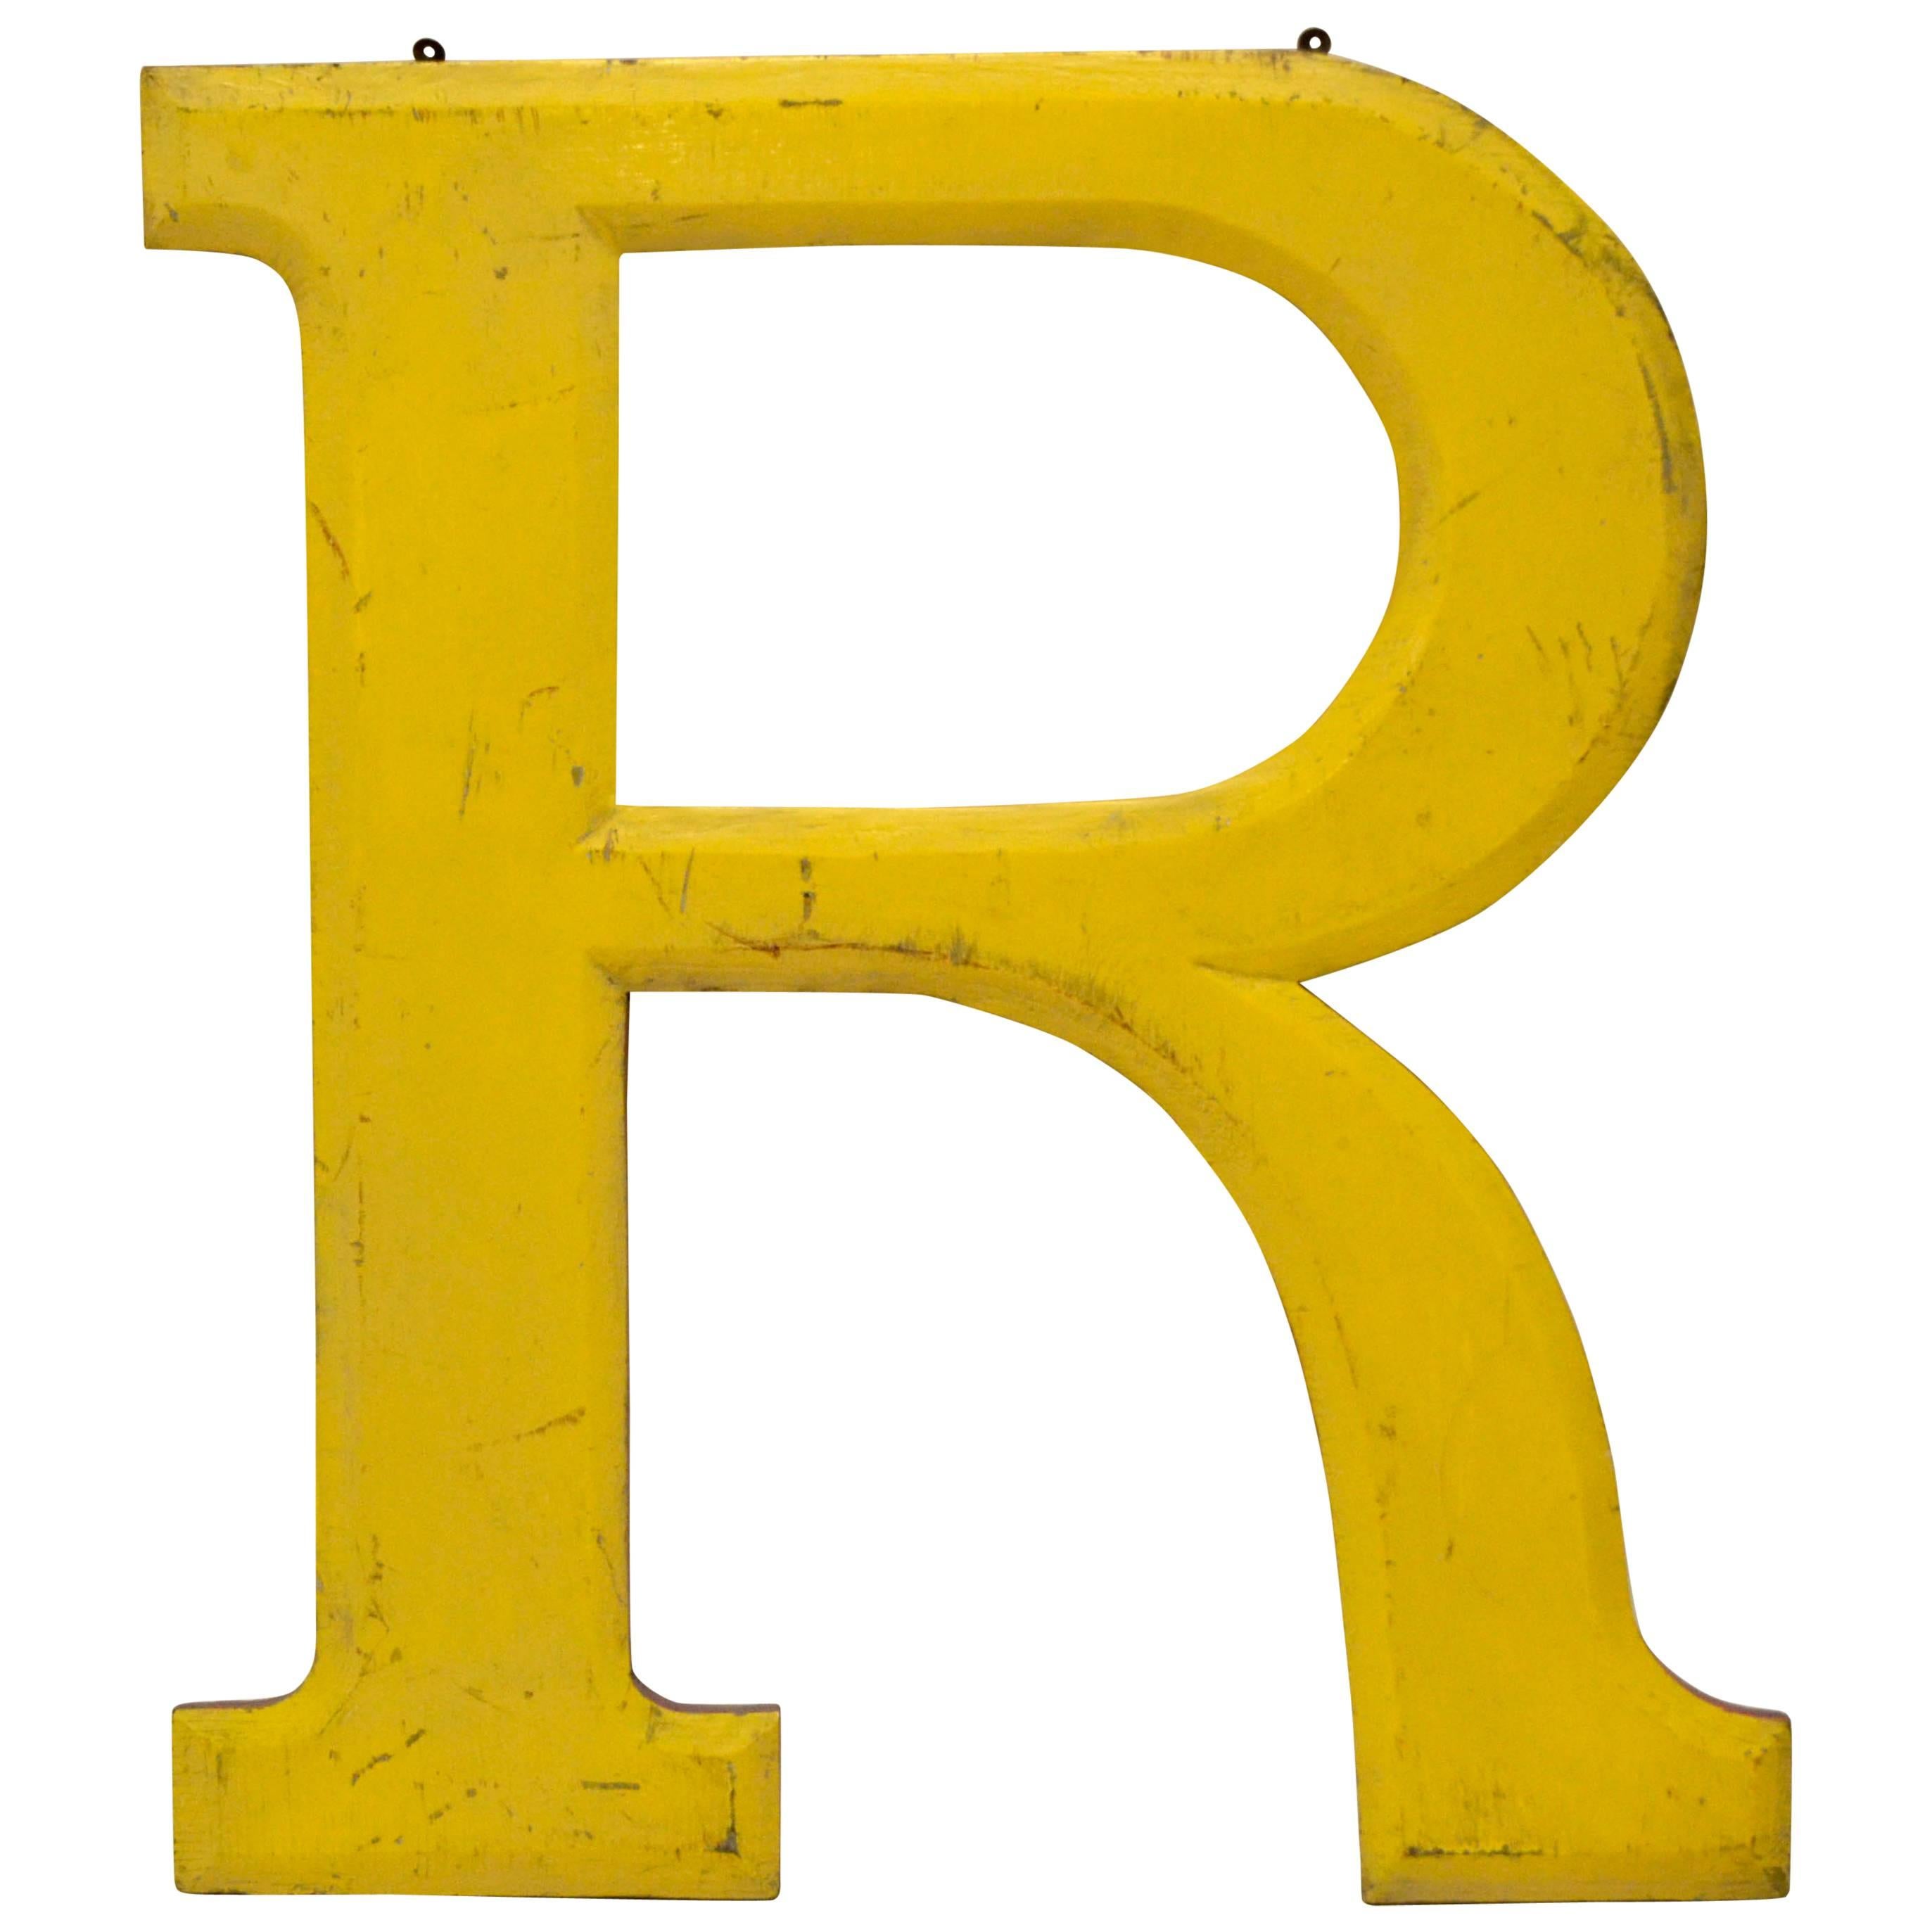 1960s Very Large Yellow Wooden Capital Letter R with Red Border Made in England